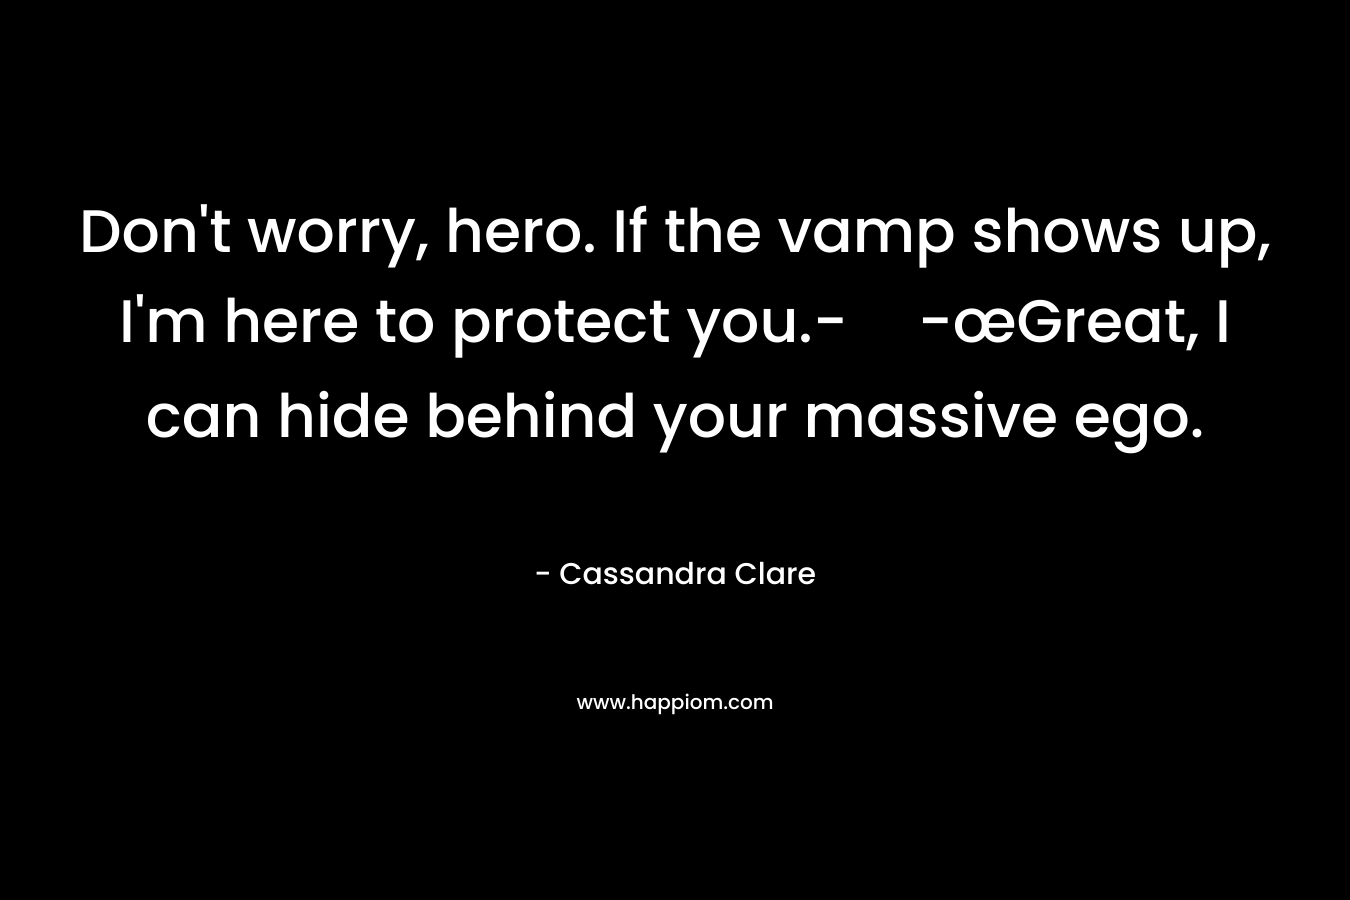 Don’t worry, hero. If the vamp shows up, I’m here to protect you.--œGreat, I can hide behind your massive ego. – Cassandra Clare